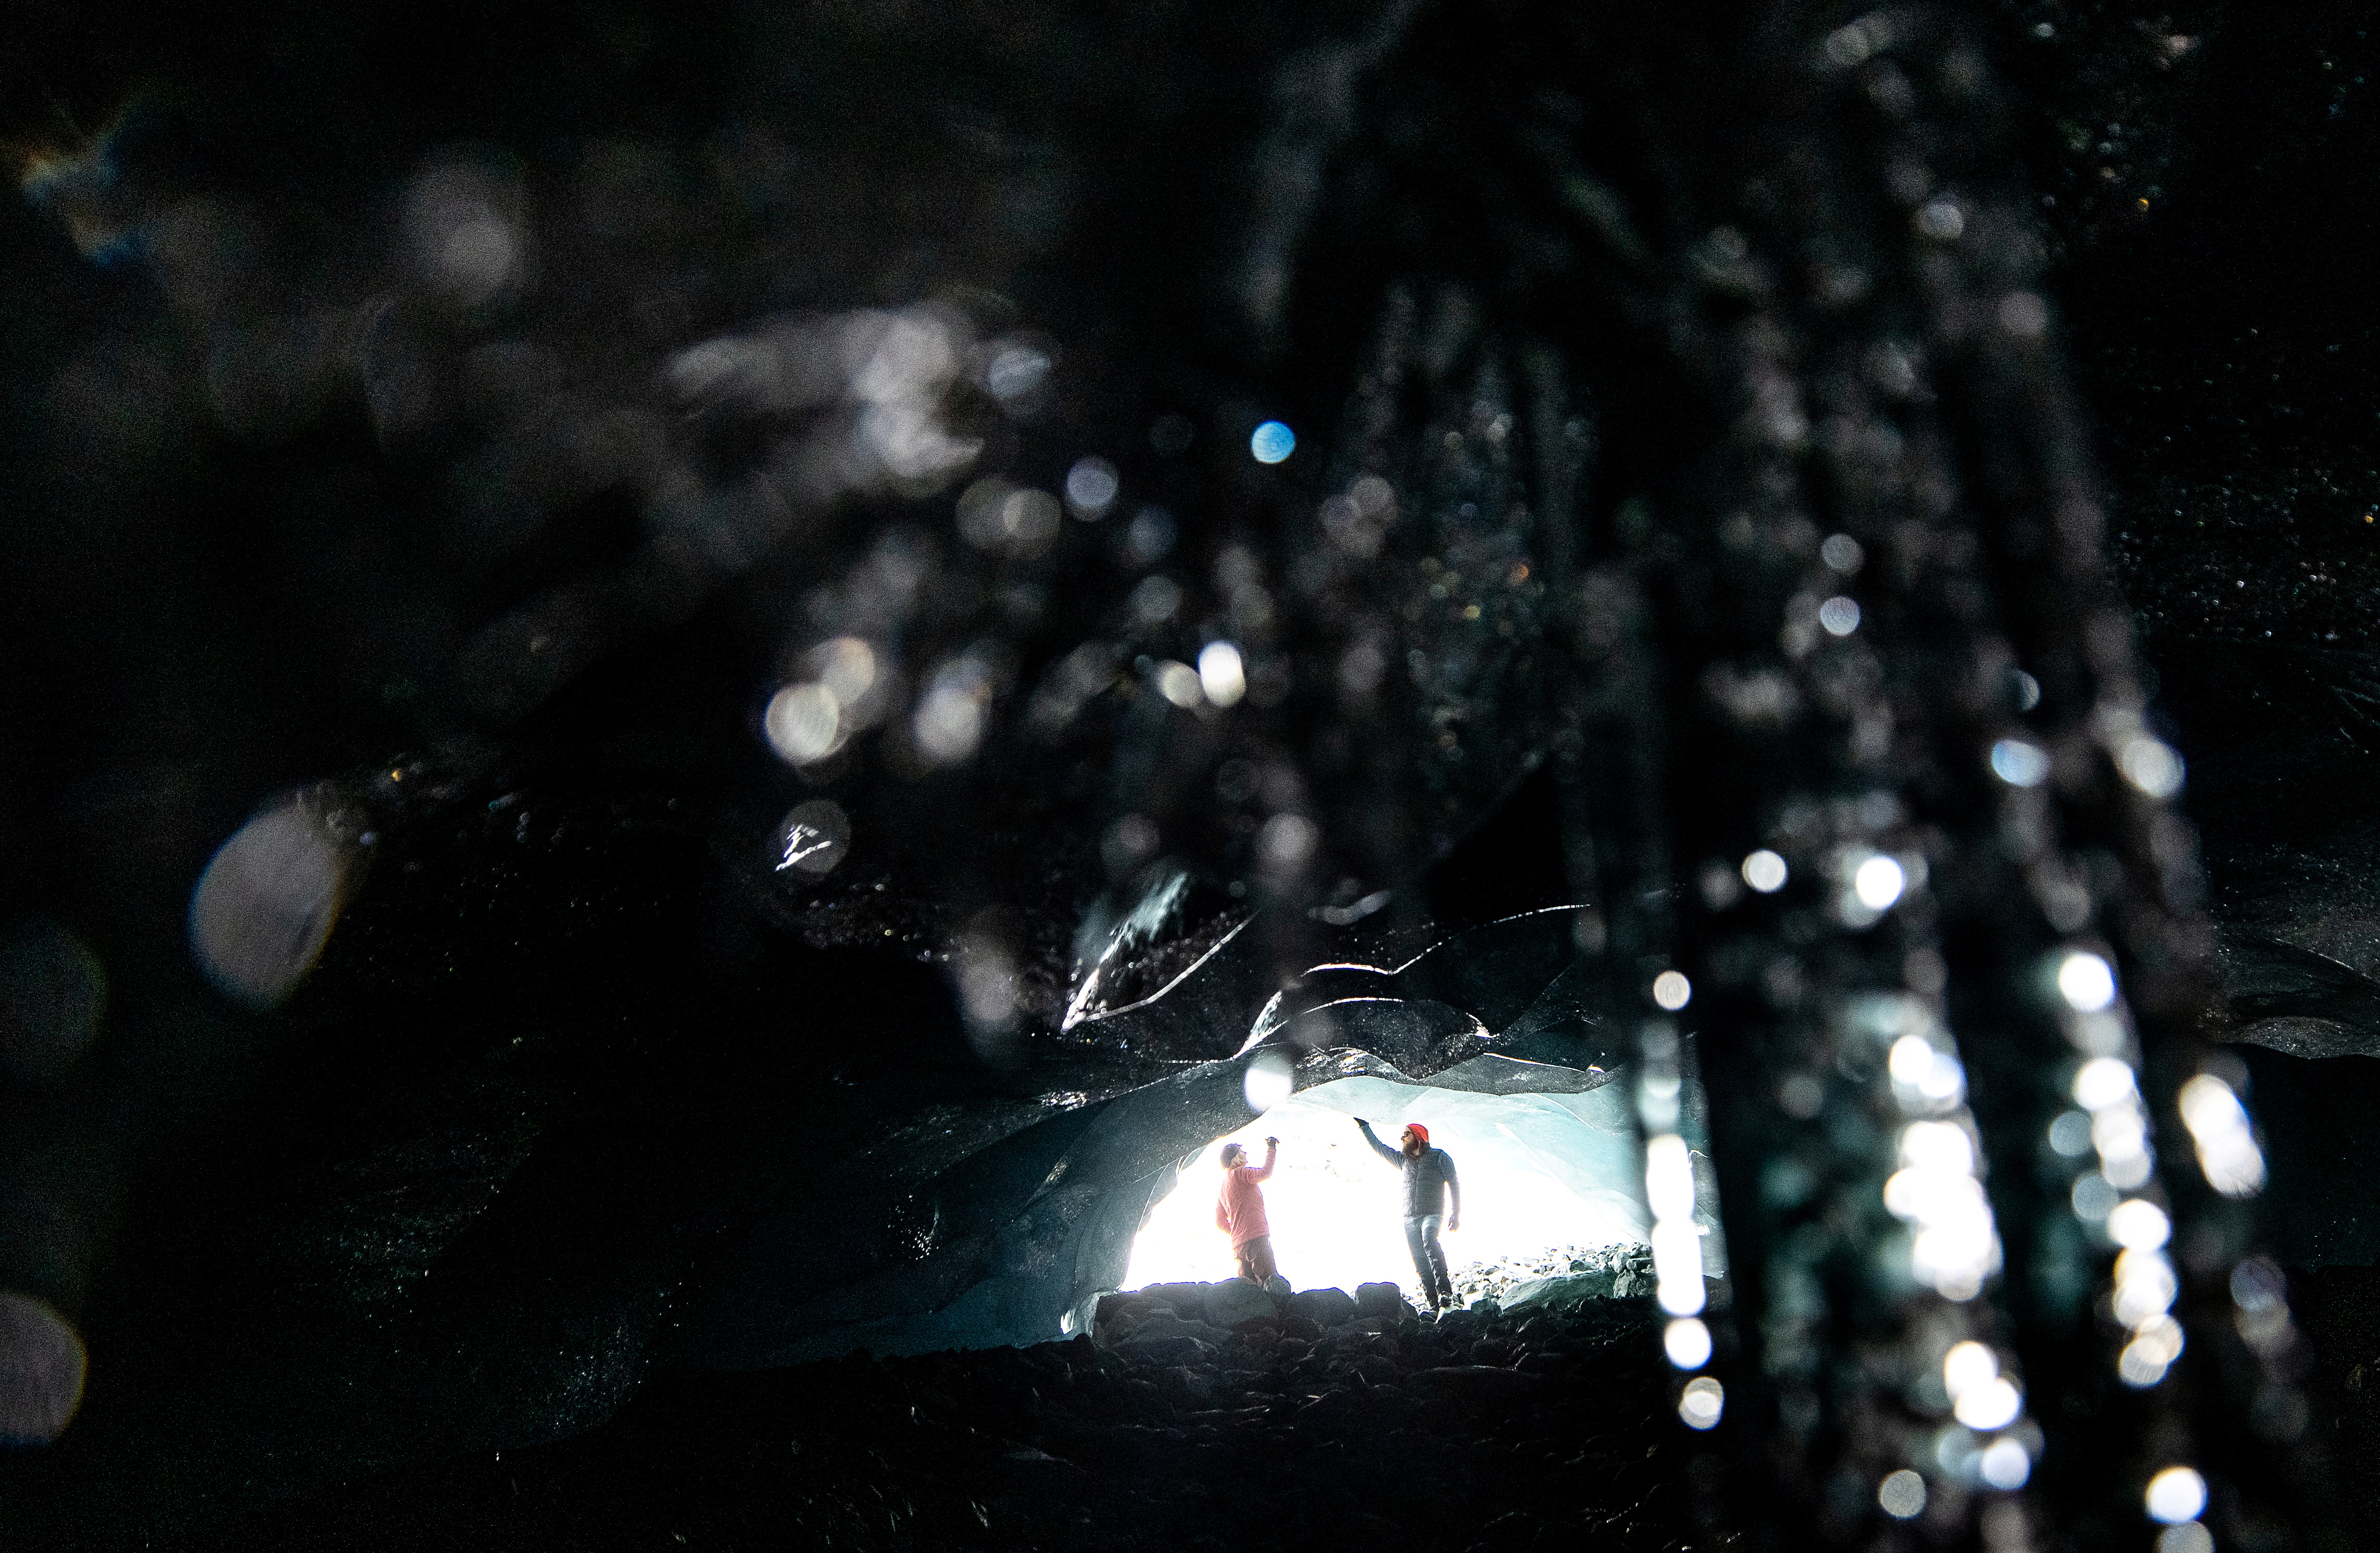 Glaciologists Andrea Fischer and Martin Stocker-Waldhuber, from the Austrian Academy of Sciences, inspect the entrance of a natural glacier cavity of the Jamtalferner glacier near Galtuer, Austria, October 15, 2021. Giant ice caves have appeared in glaciers accelerating the melting process faster than expected as warmer air rushes through the ice mass until it collapses. Picture taken October 15, 2021. REUTERS/Lisi Niesner